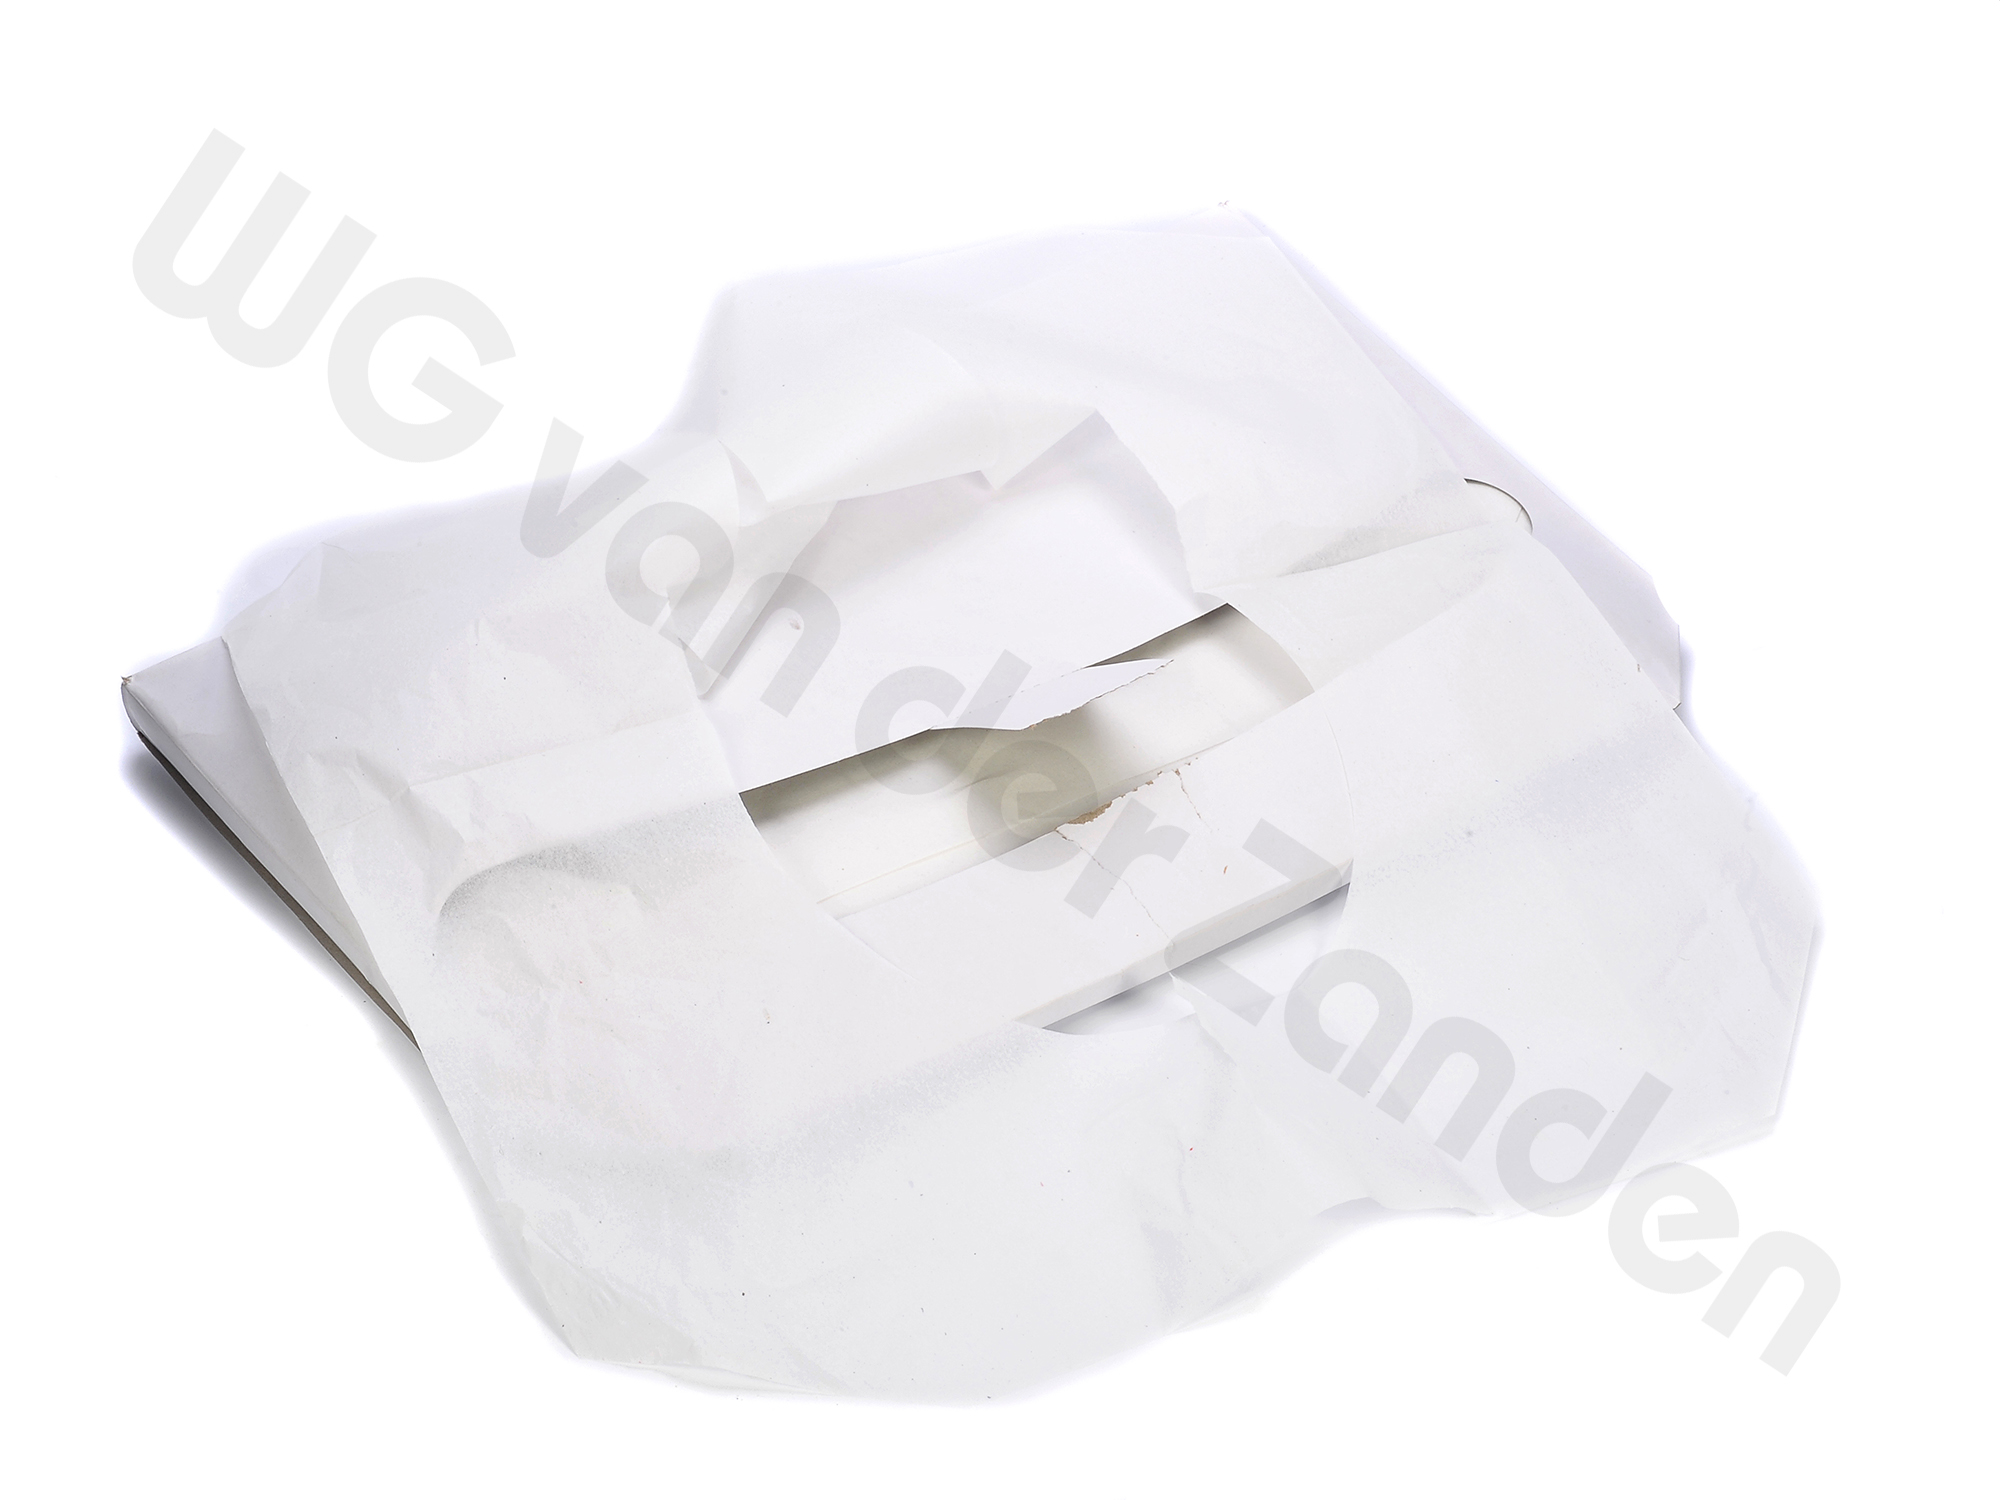 130028 TOILET SEAT COVER DISPOSABLE